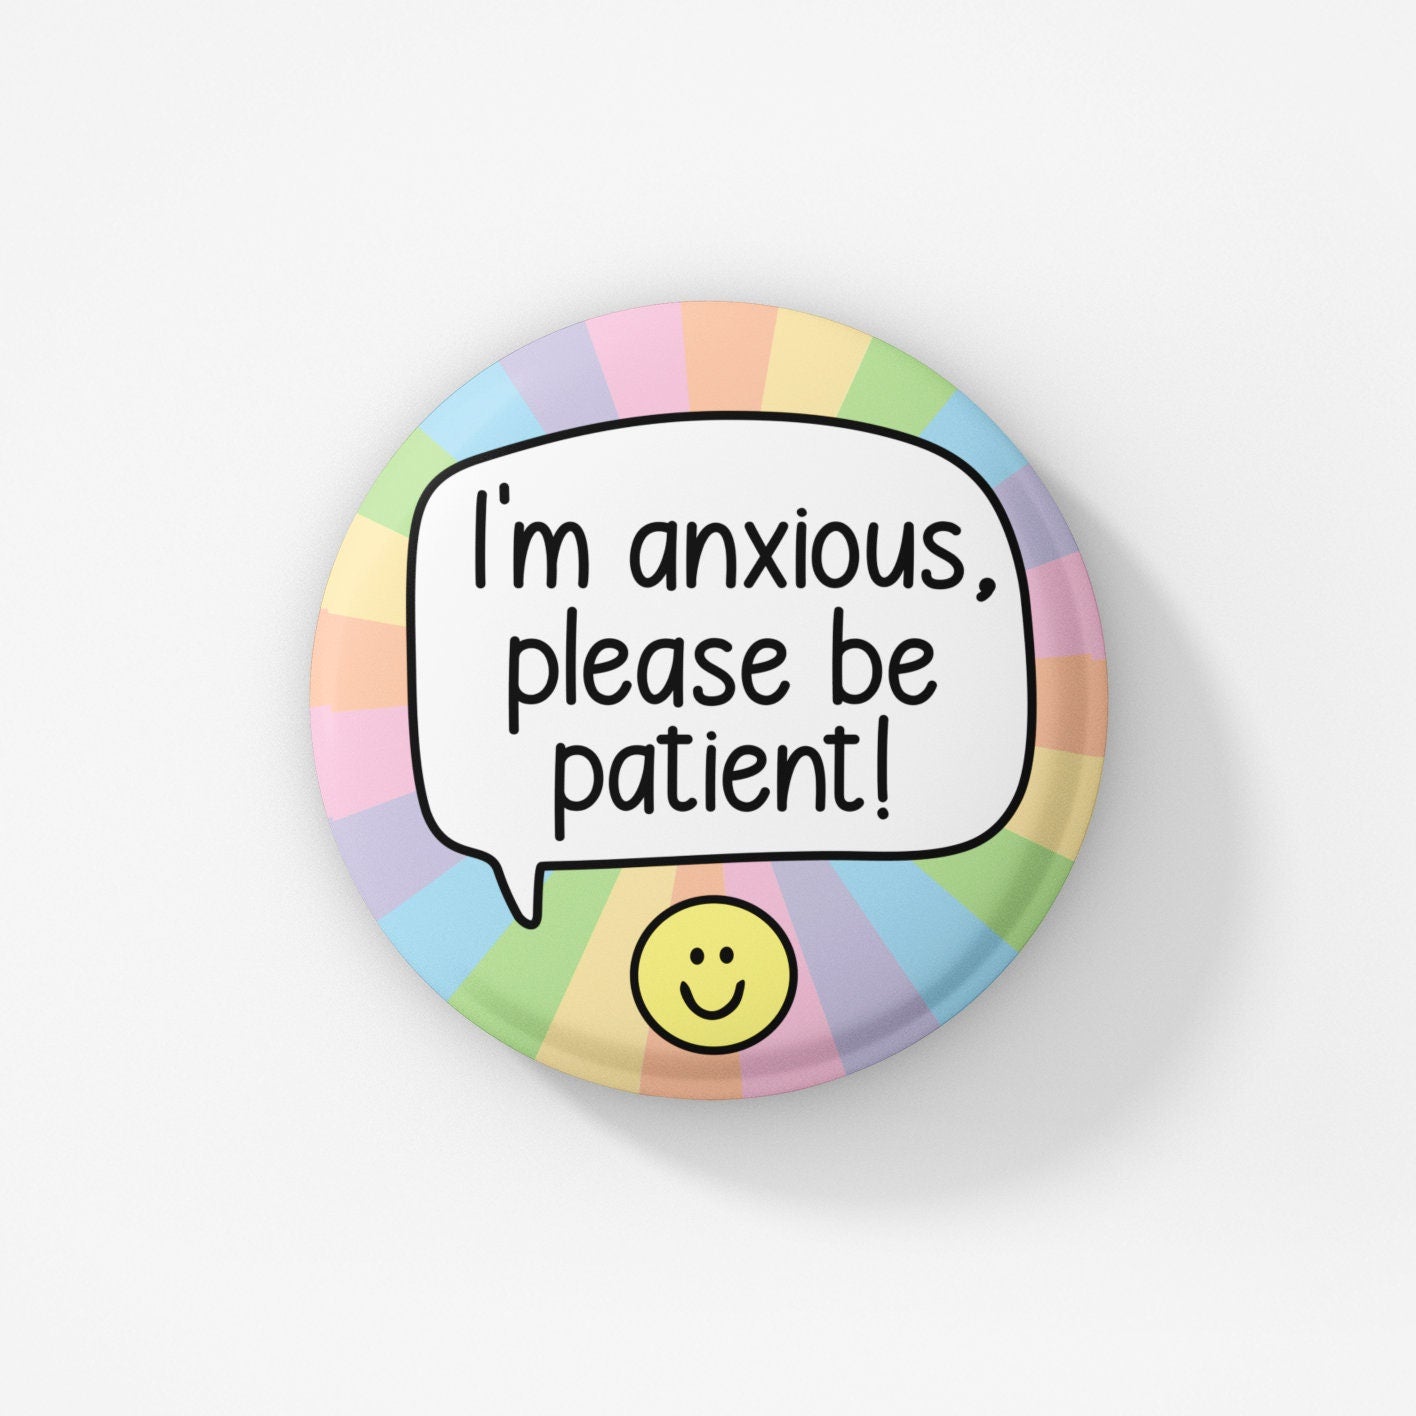 I'm Anxious Please Be Patient! Badge Pin | Mental Health Badge - Anxiety - Anxious Pin